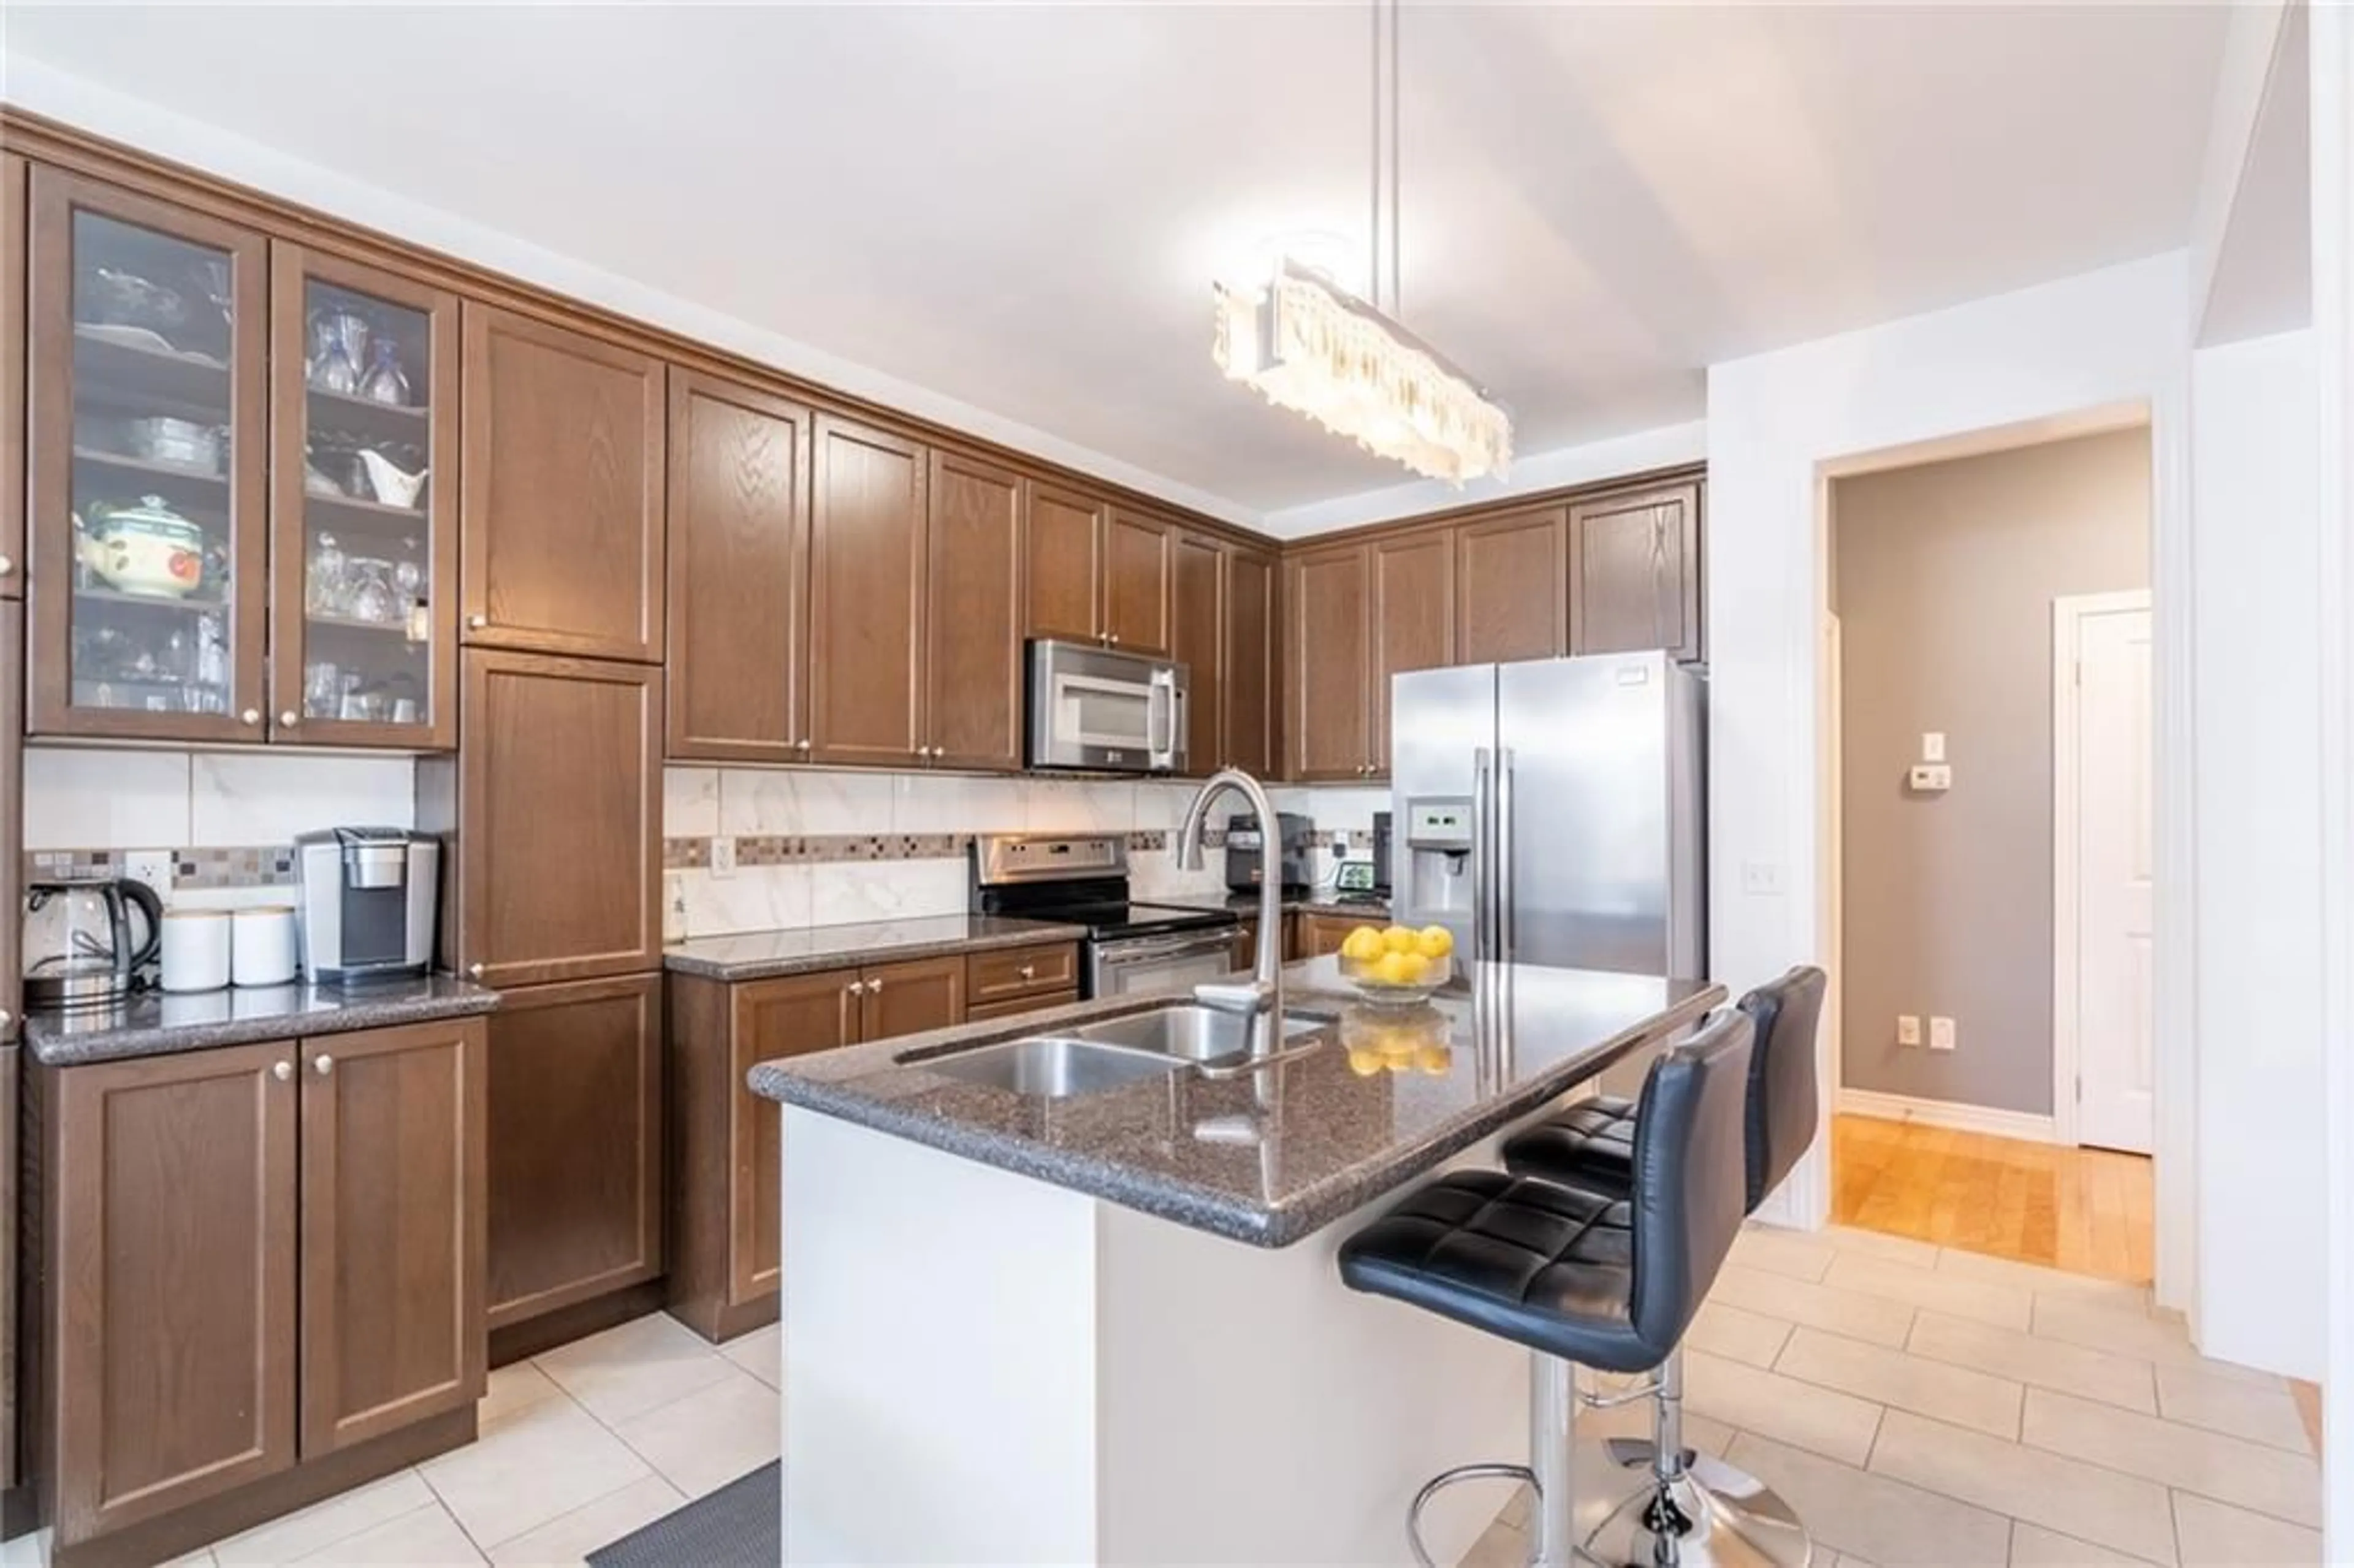 Contemporary kitchen for 6 Juneberry Rd, Thorold Ontario L2V 5G5